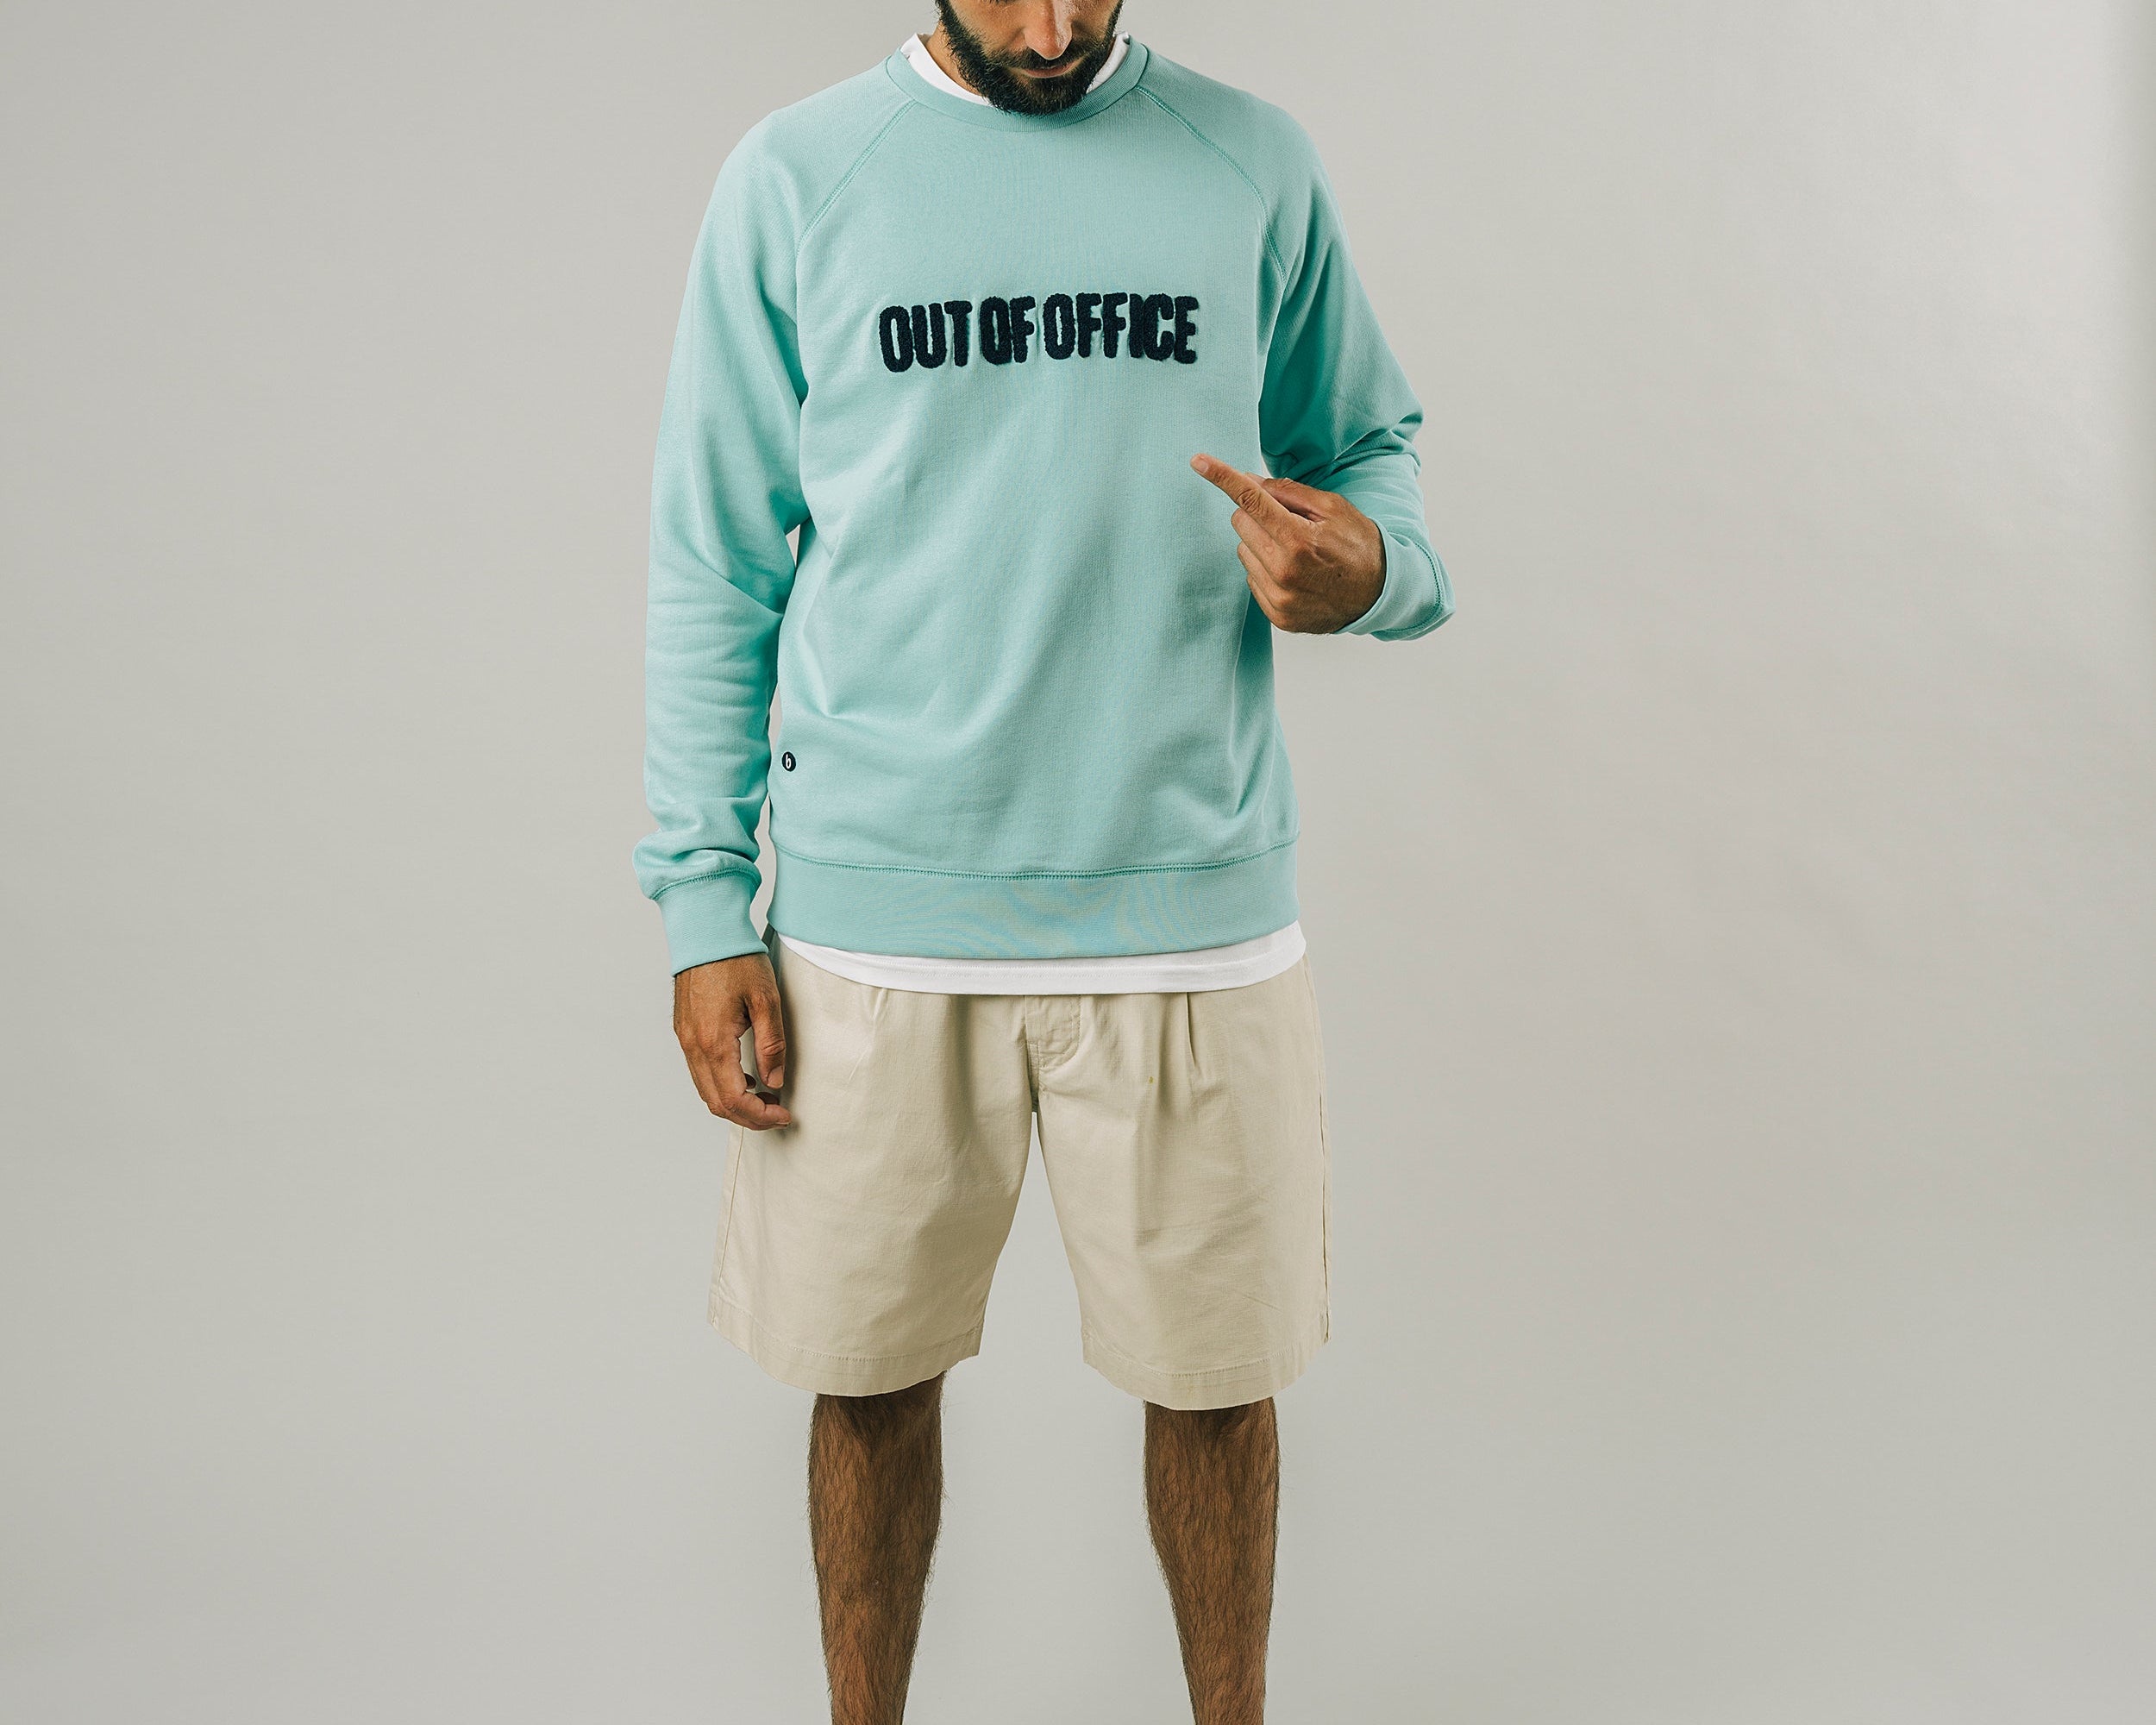 Brava - Out of Office Sweatshirt Pool - The Good Chic